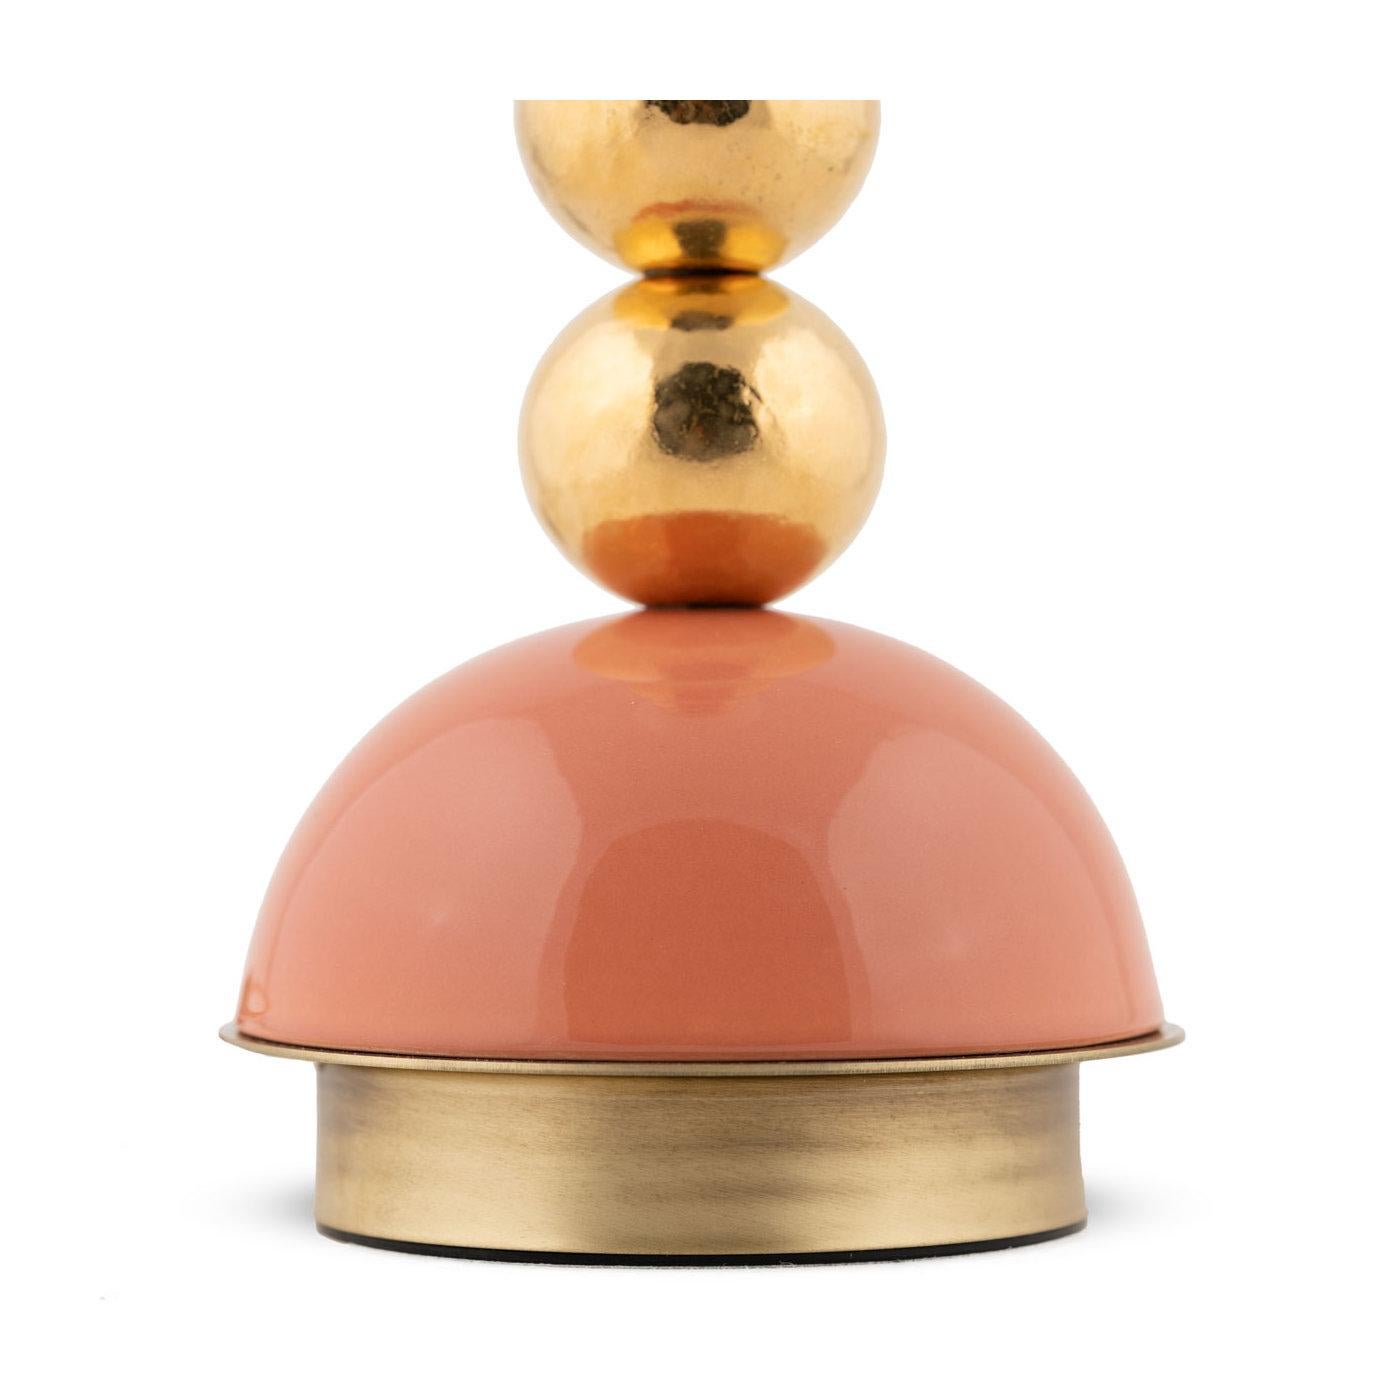 A splendid combination of lines and hues, this table lamp will add a lively accent in any modern interior decor. Resting on a peach-glazed ceramic base mounted on a satin brass plate, the main body is composed of four spherical elements in